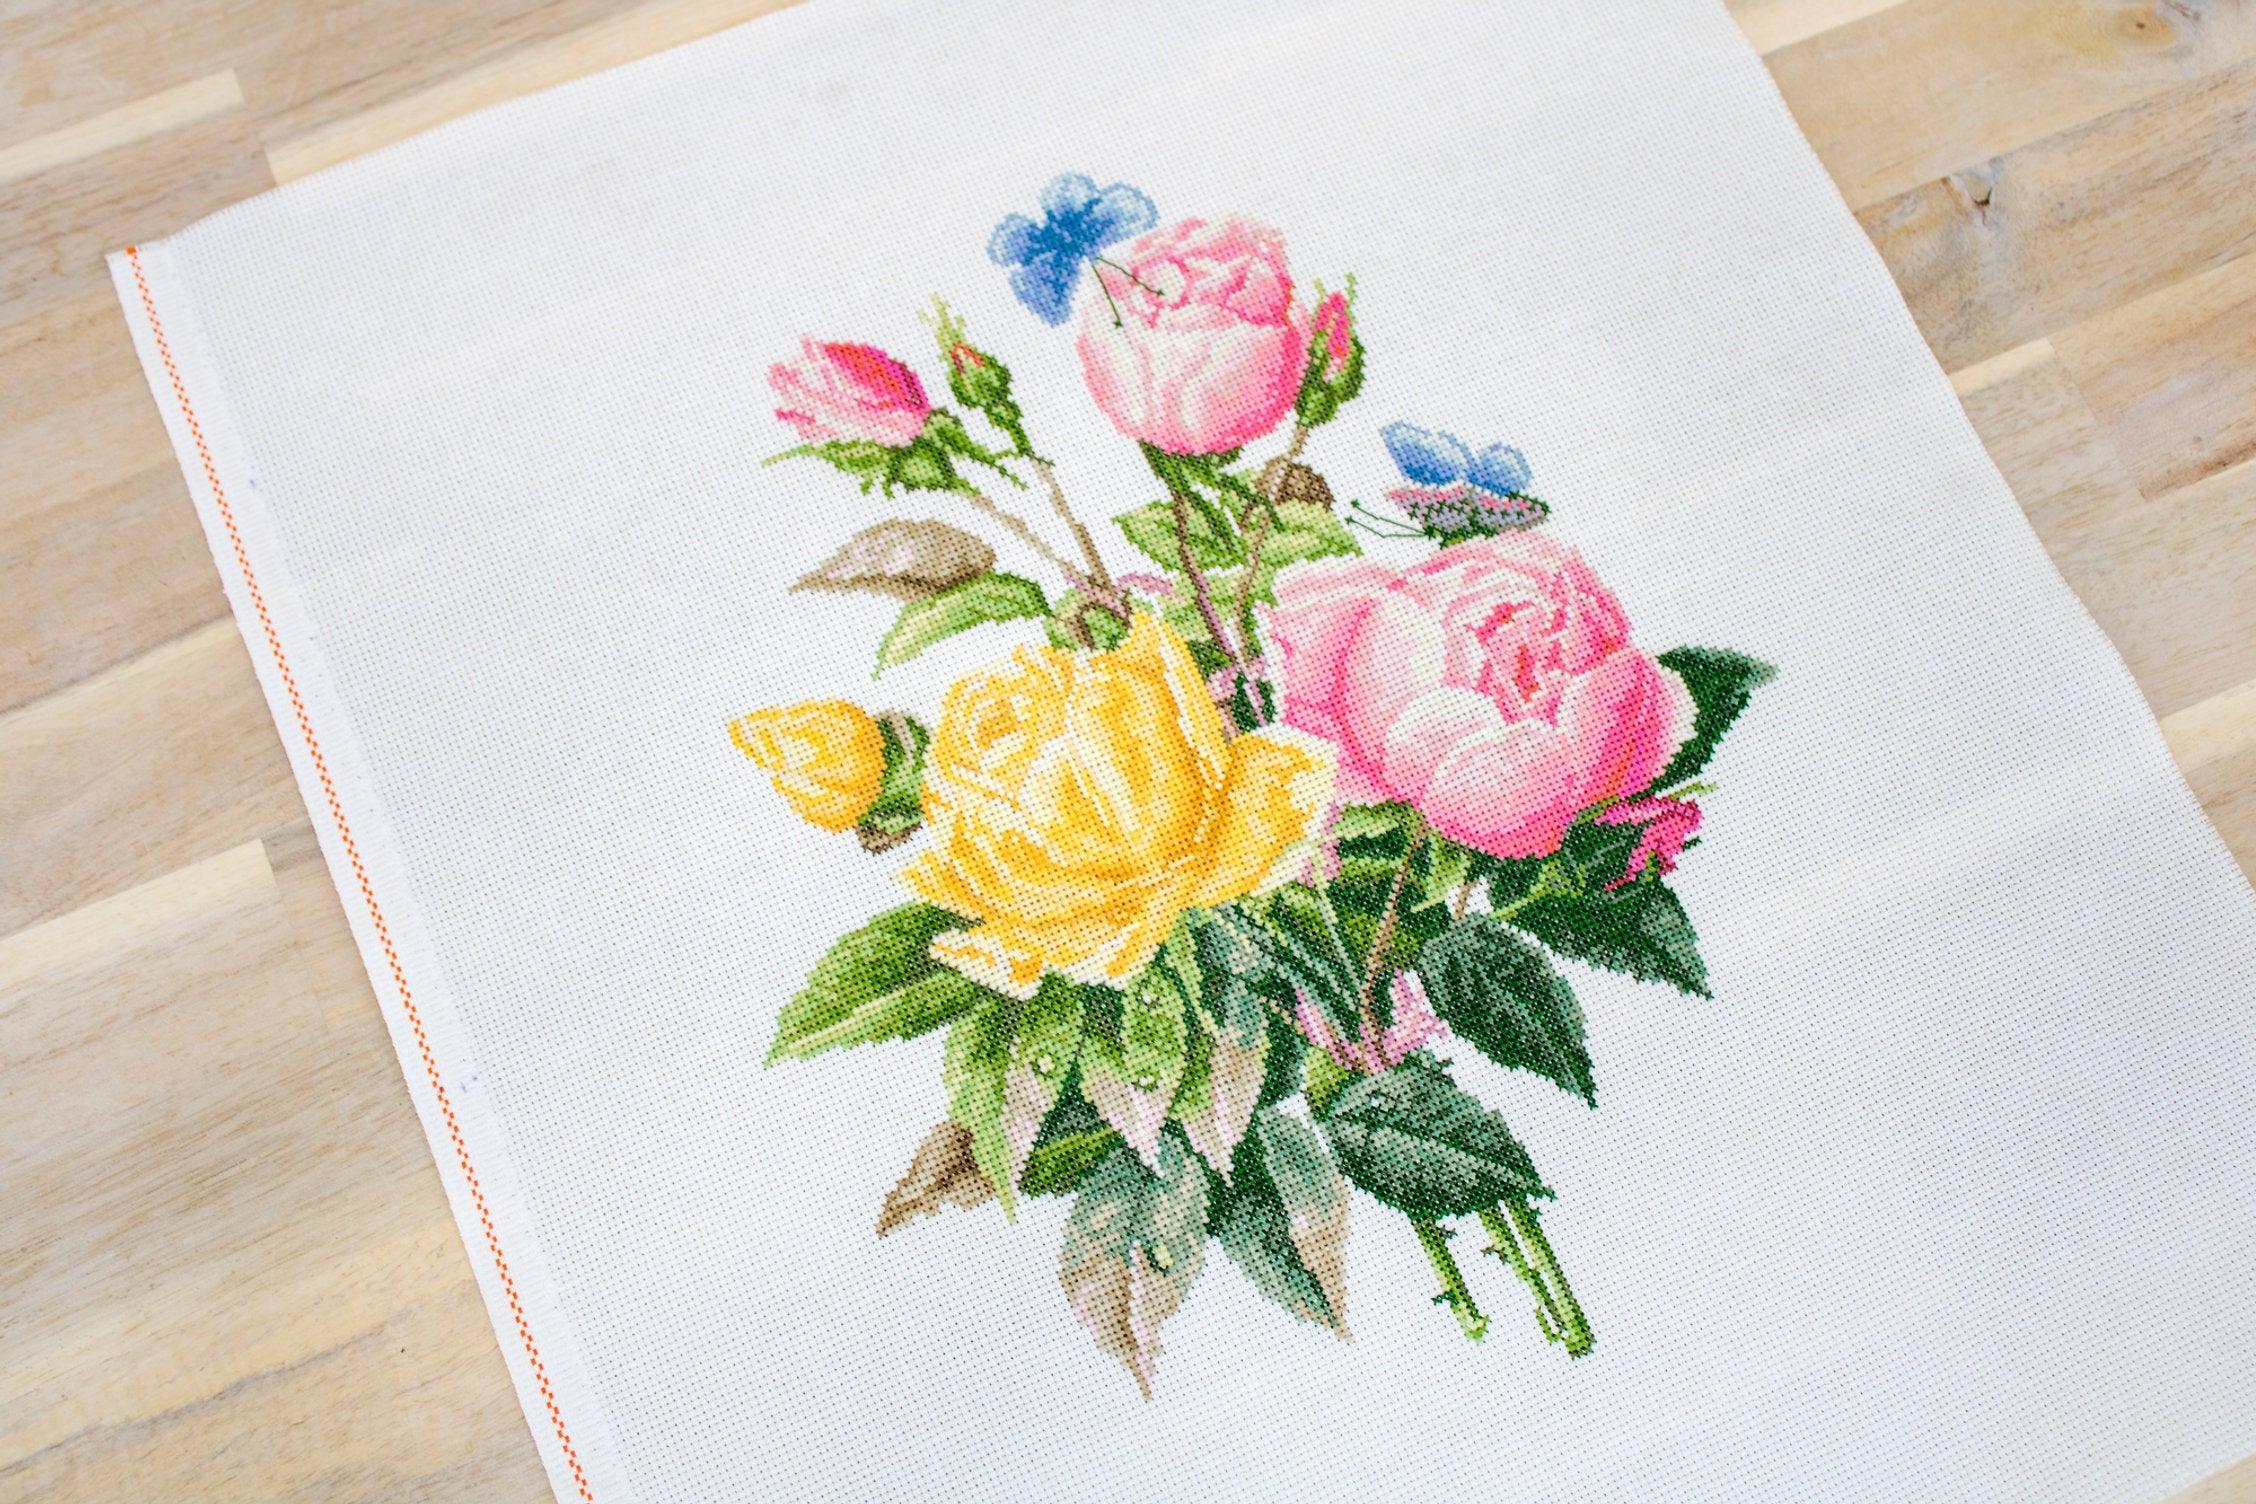 Cross Stitch Kit Luca-S - Yellow Roses and Bengal Roses, BU4003 - Luca-S Cross Stitch Kits